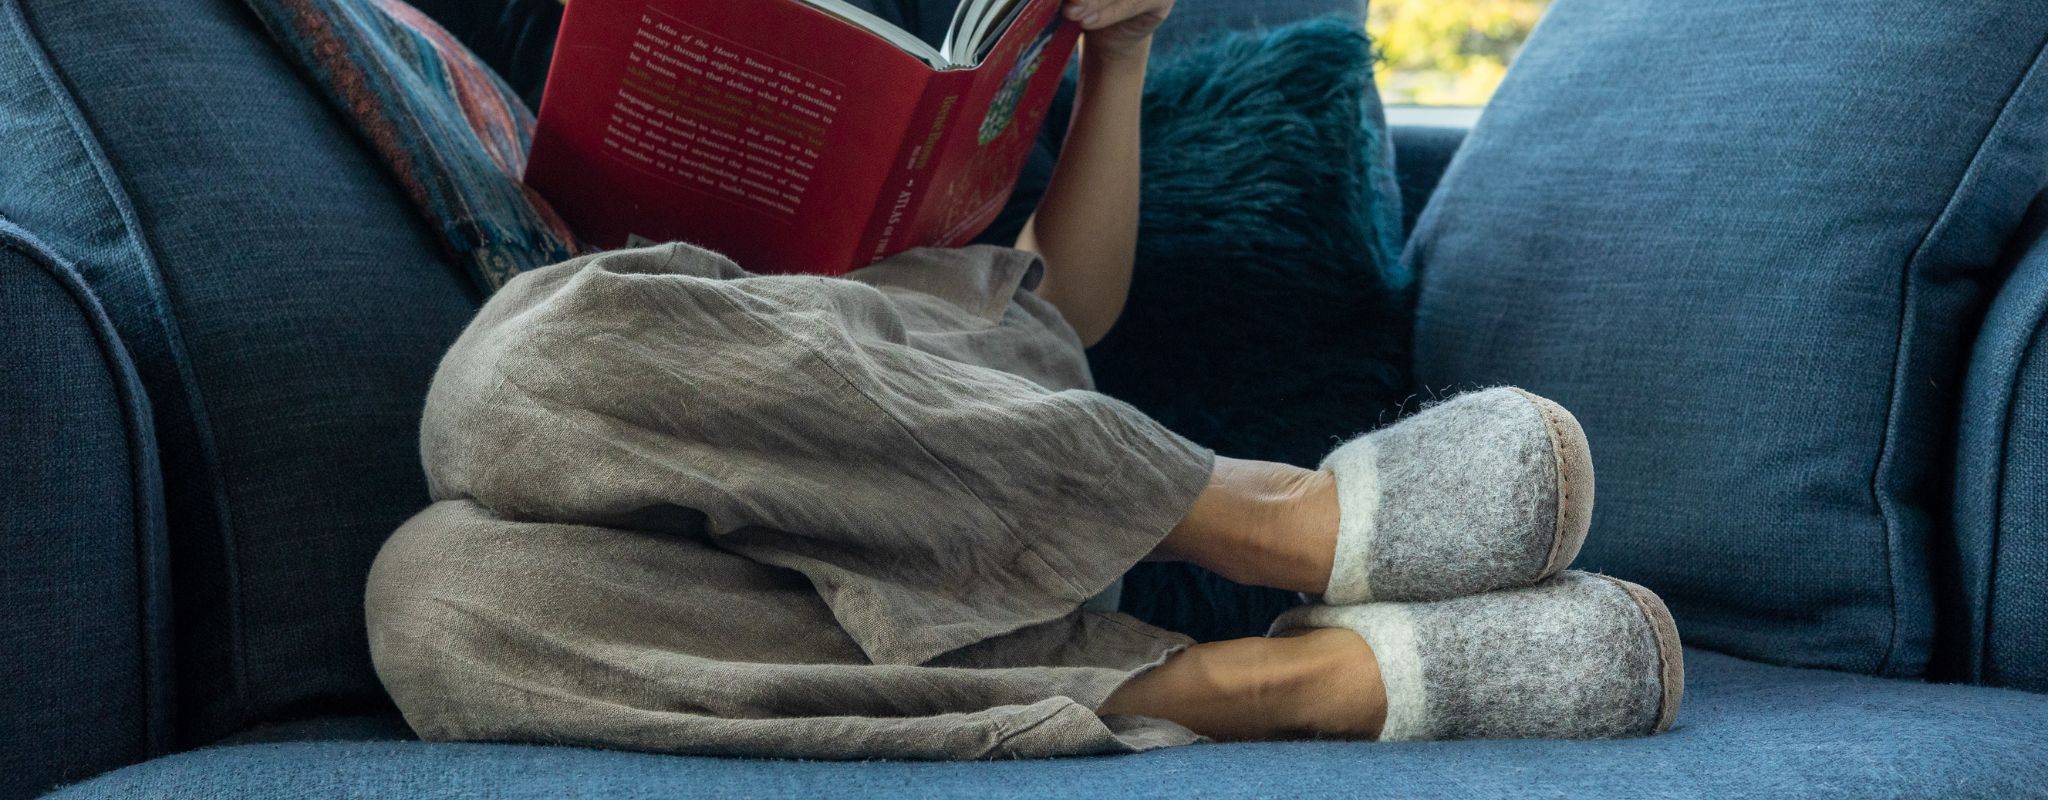 Person relaxing on a couch, reading a book, with wool slippers on their feet